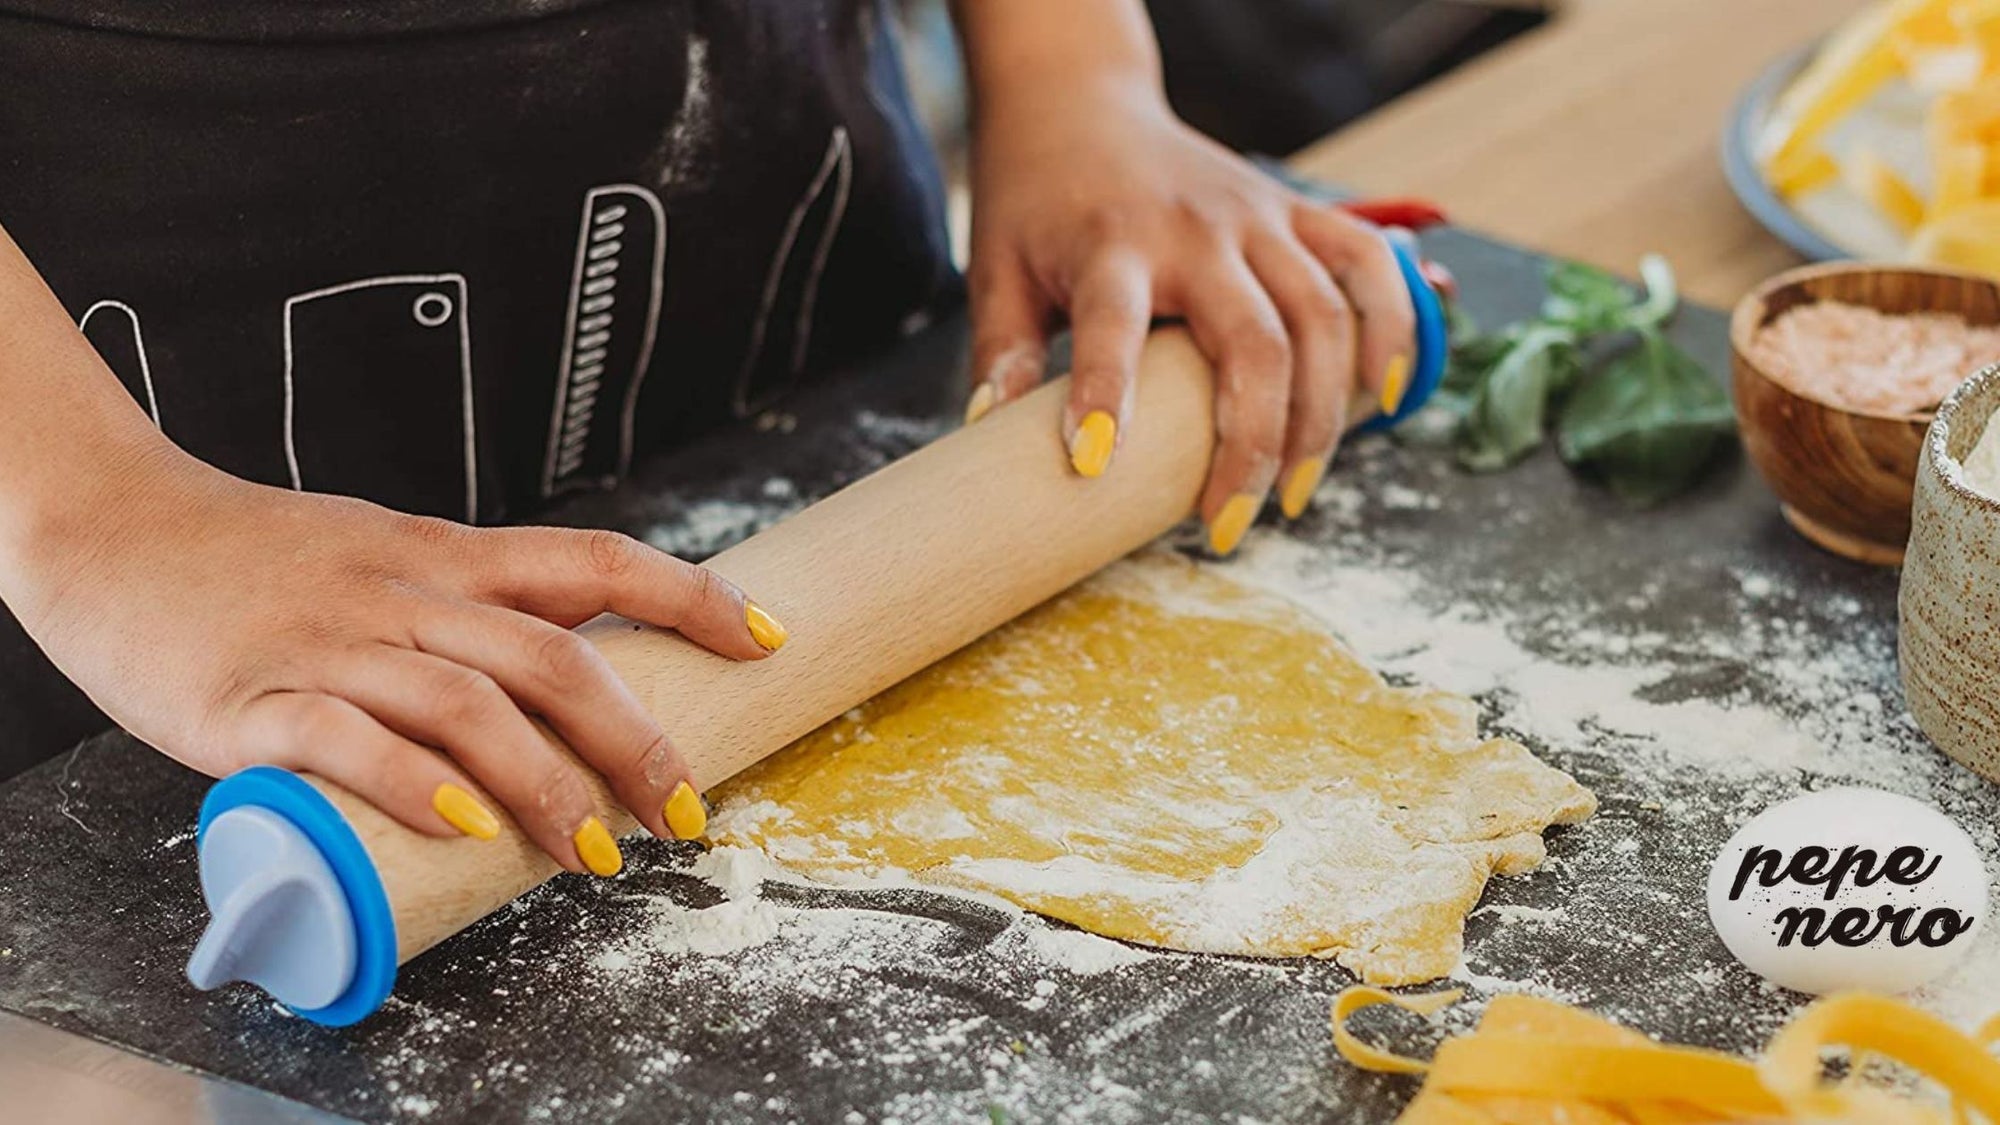 A person using a Pepe Nero rolling pin to roll out cookie dough